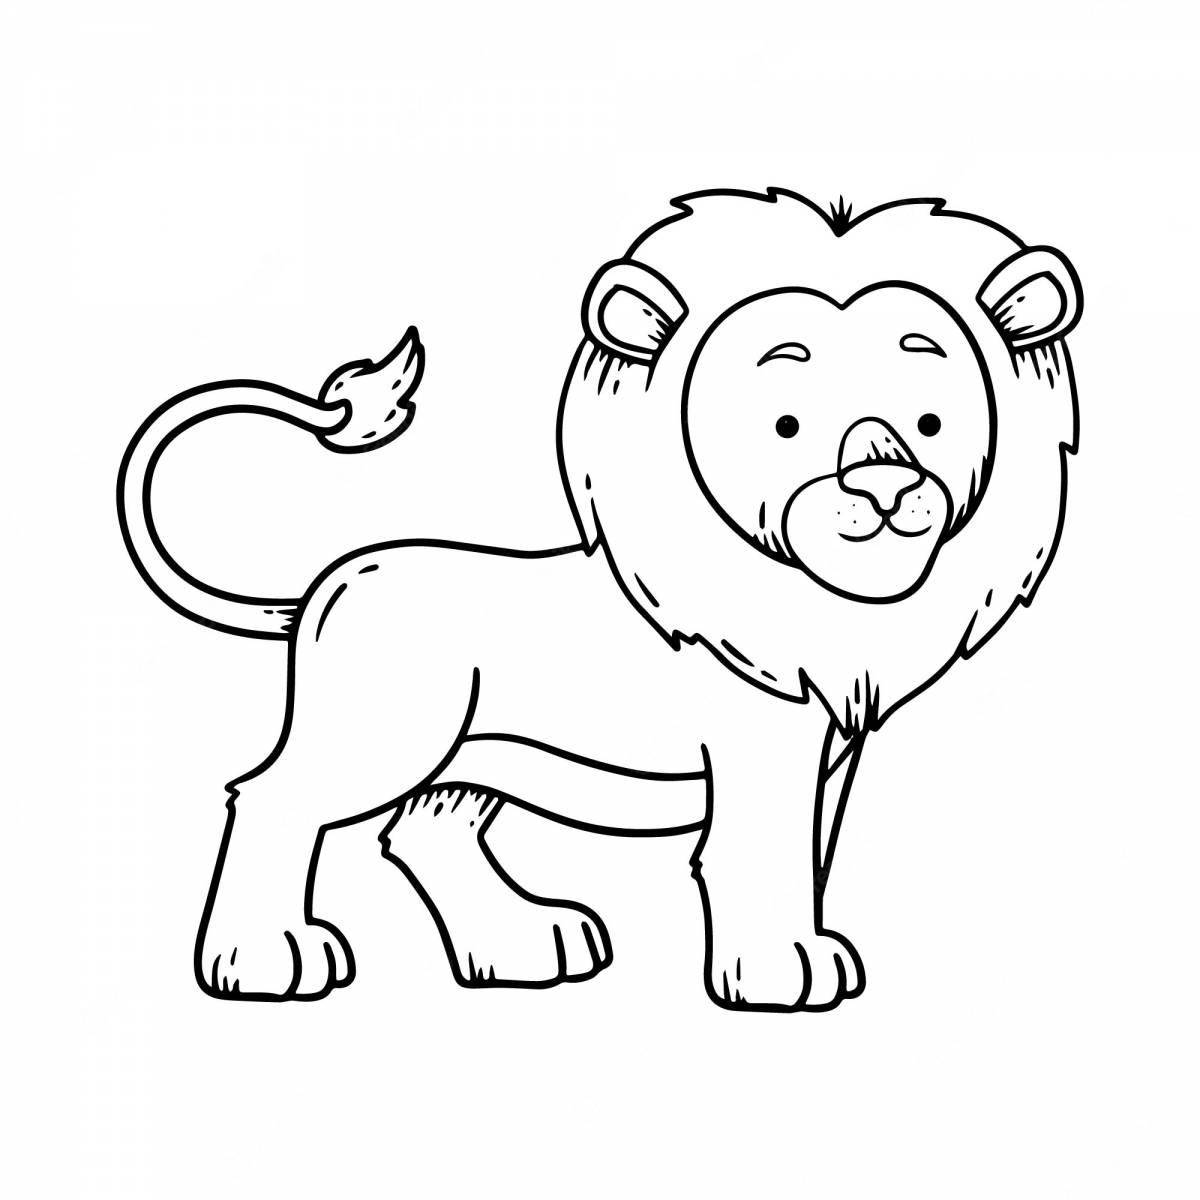 Exquisite lion coloring book for 6-7 year olds